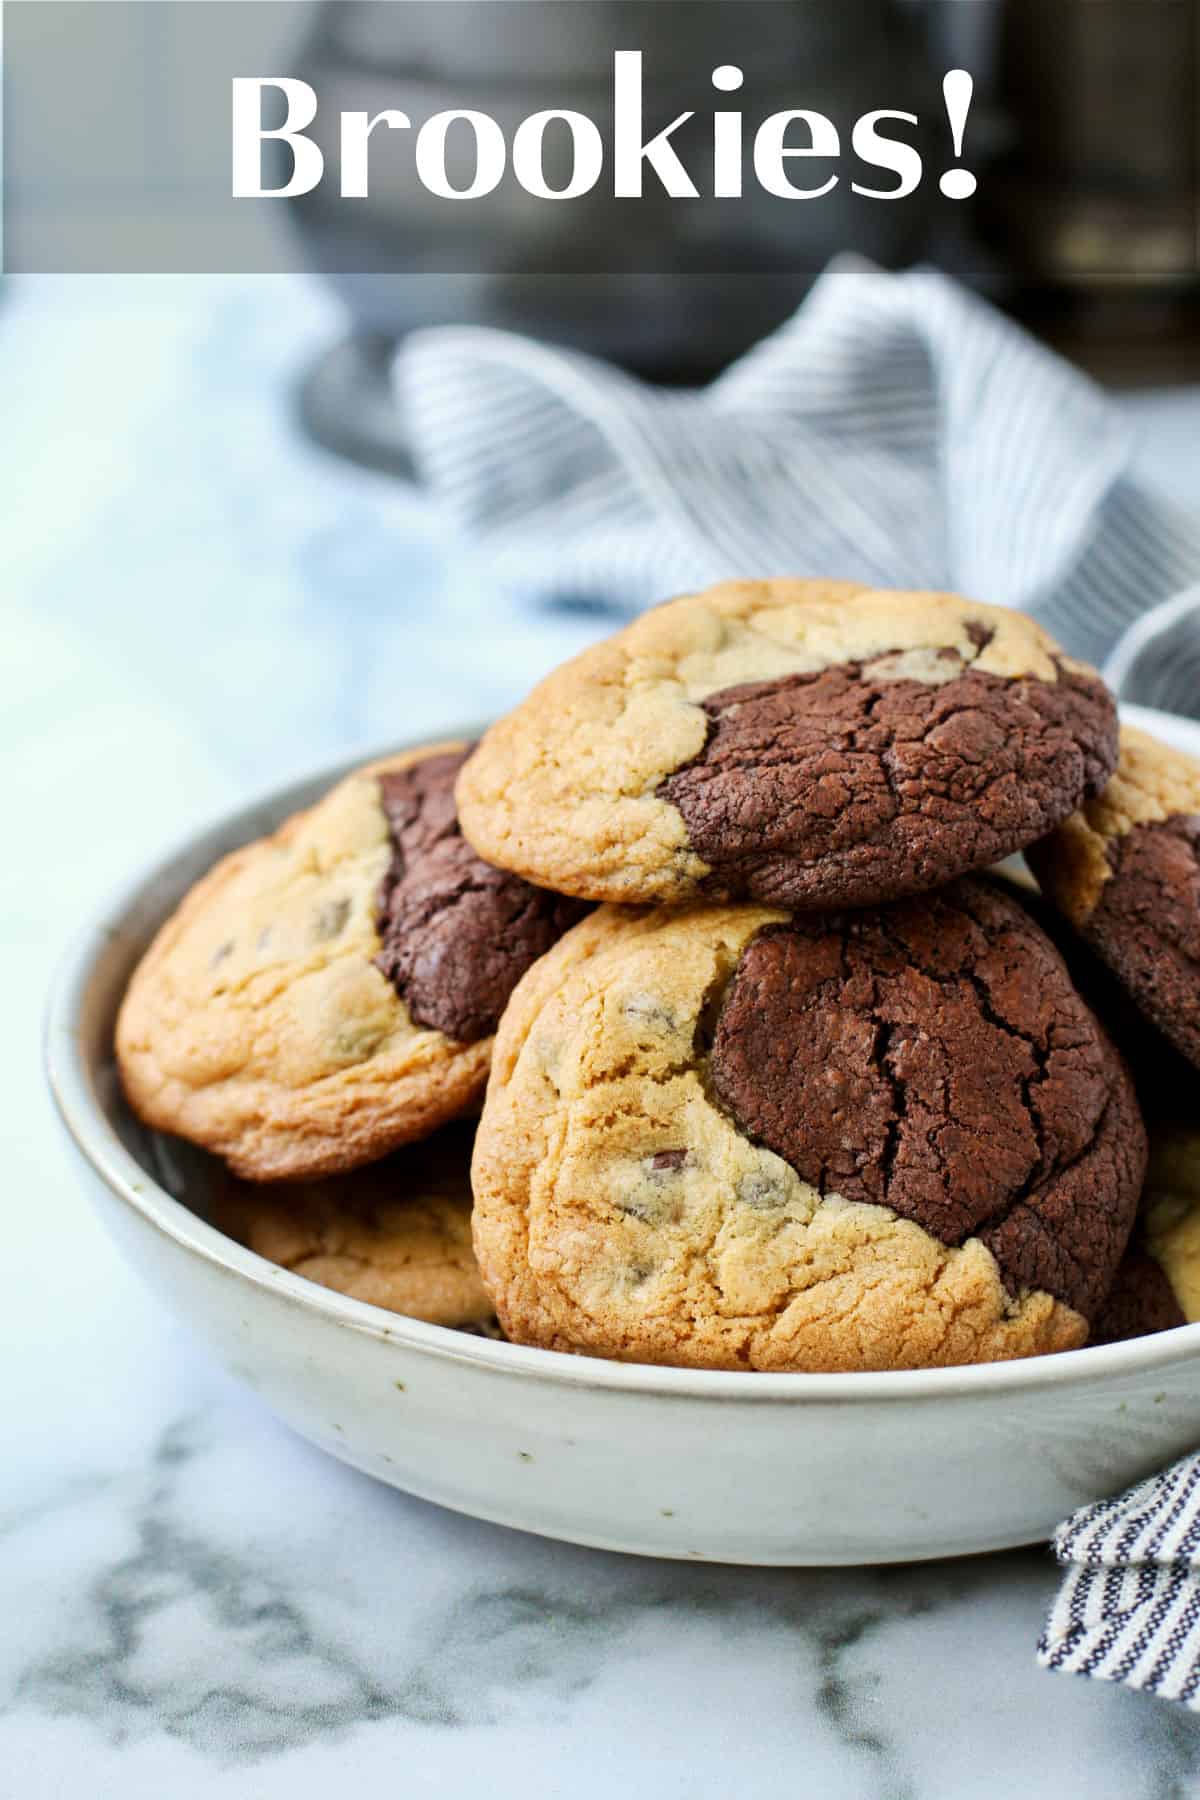 Half Brownie and Chocolate Chip Cookies in a bowl.